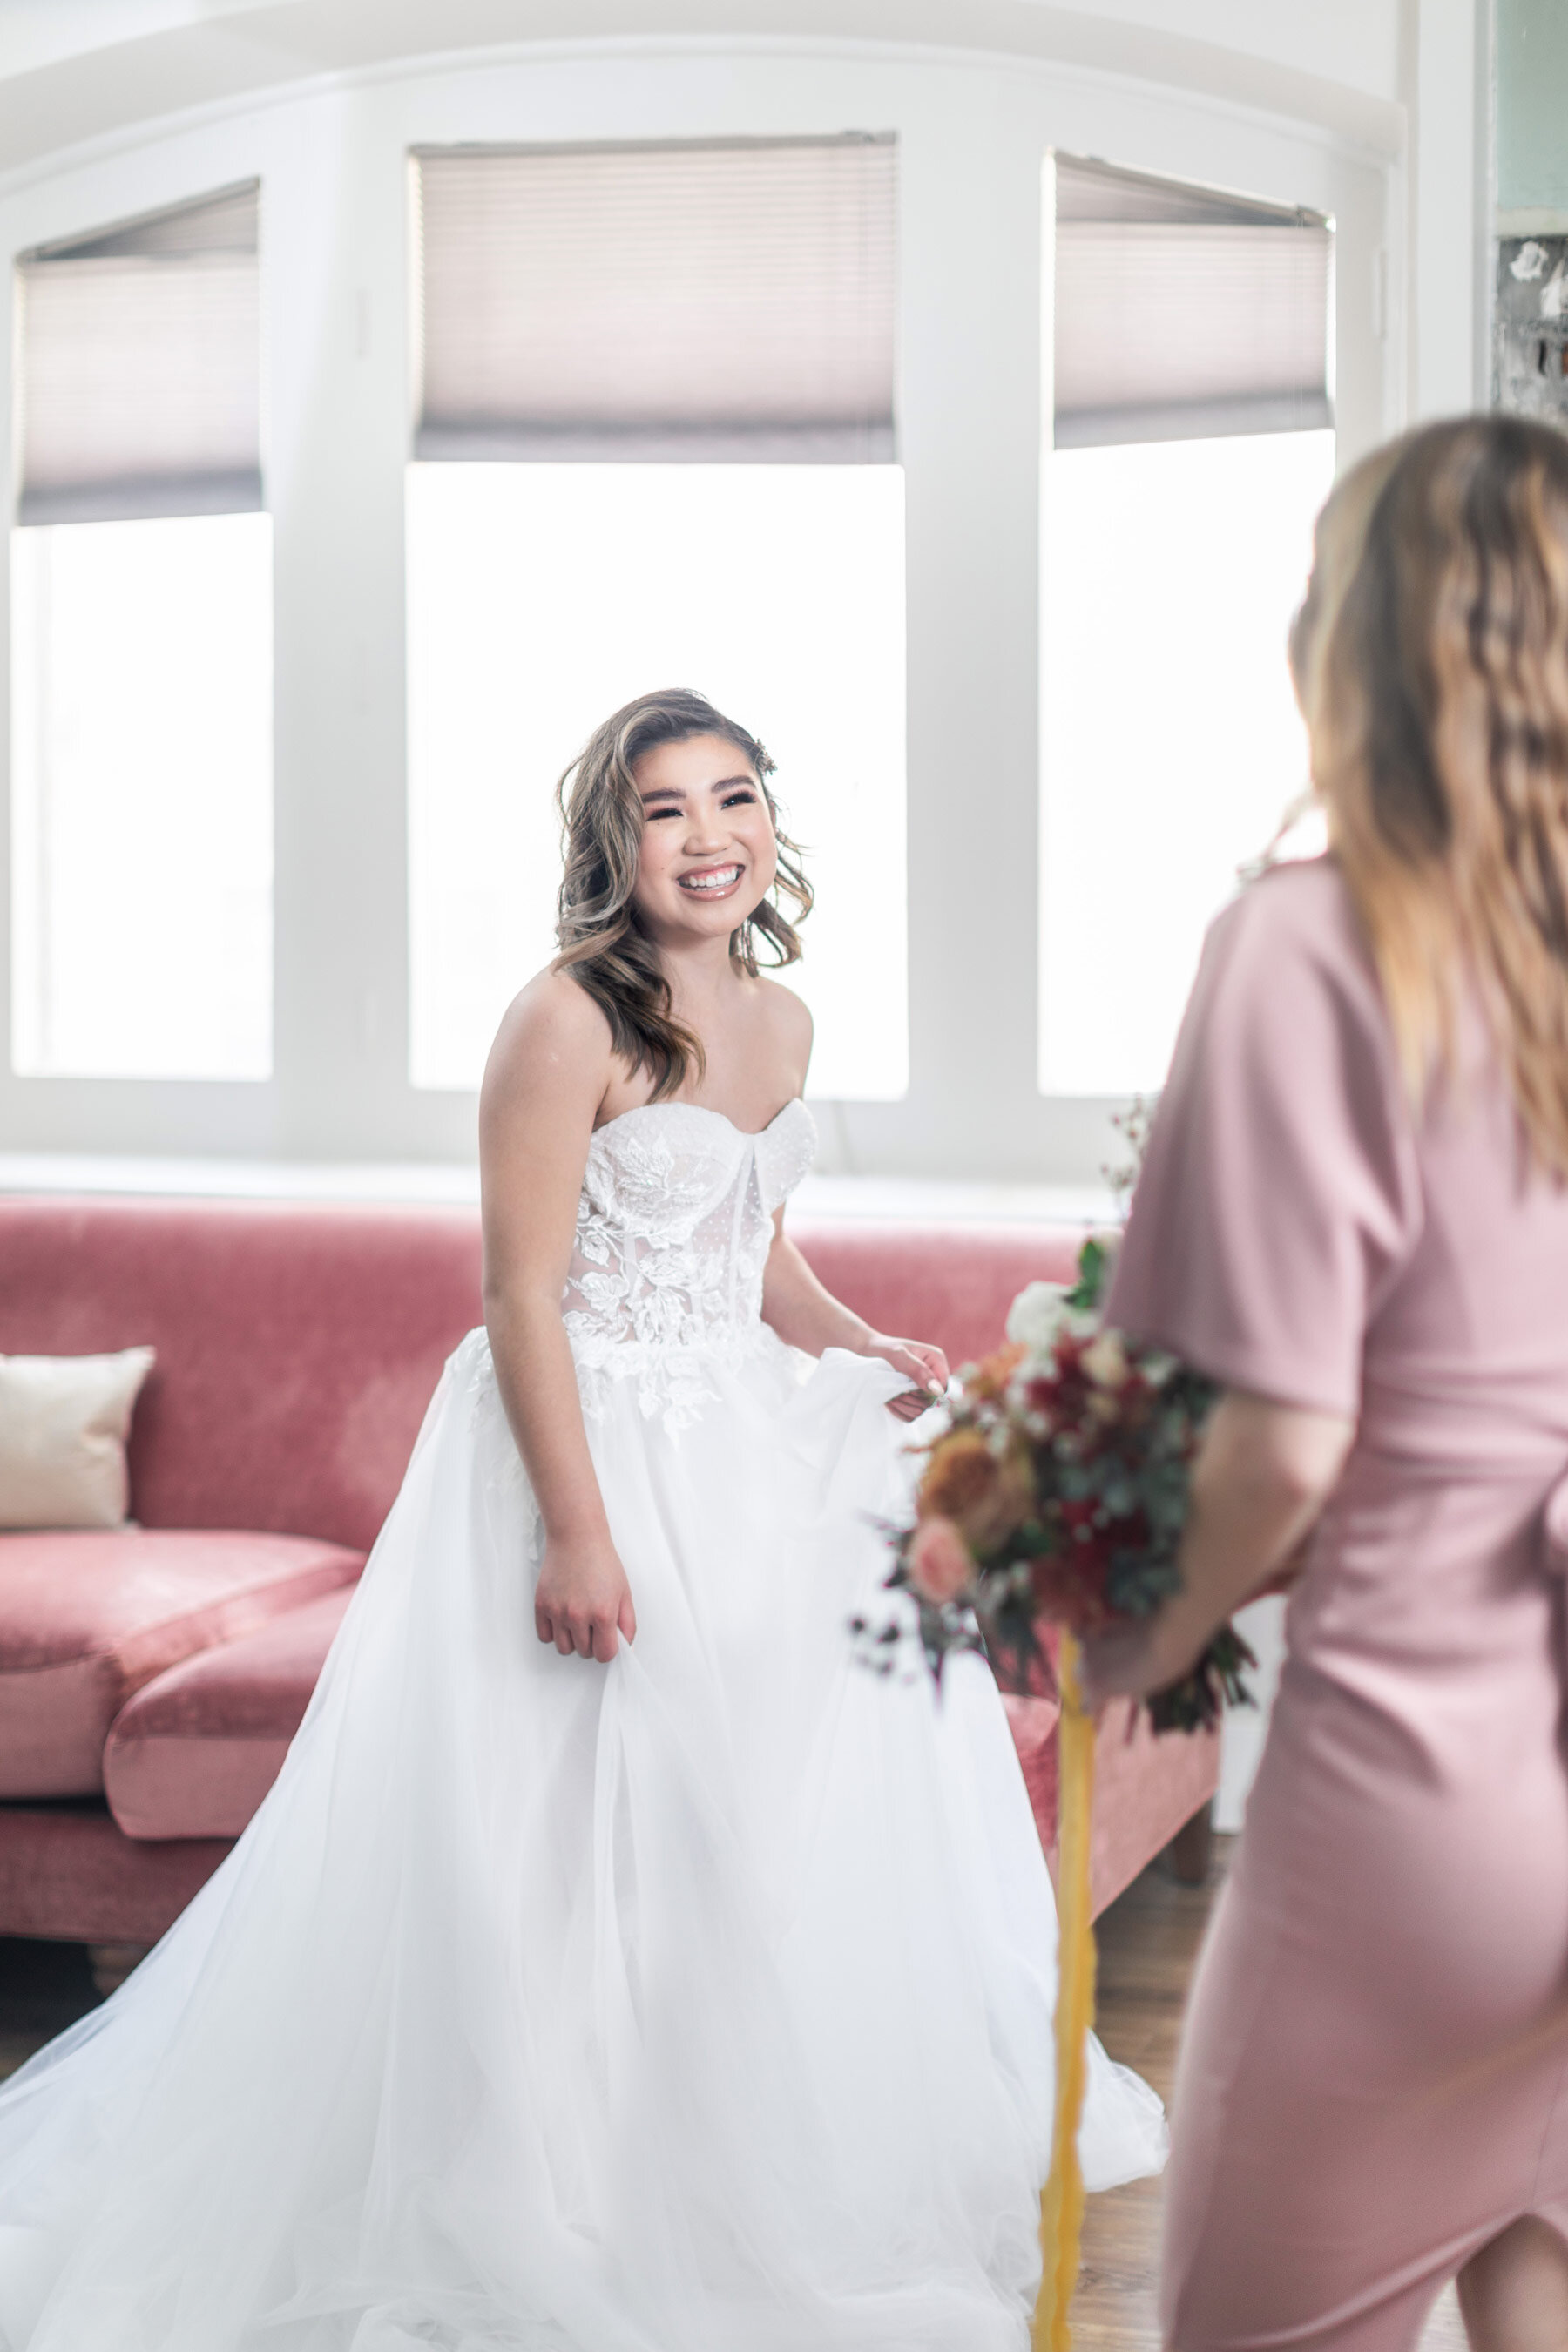  On this bride's wedding morning in Salt Lake City, UT, Clarity Lane captures silk robed bridesmaid's first looks as they see the bride in her wedding dress. translucent corset wedding dress strapless mauve silk bridesmaids robes Salt Lake City weddi